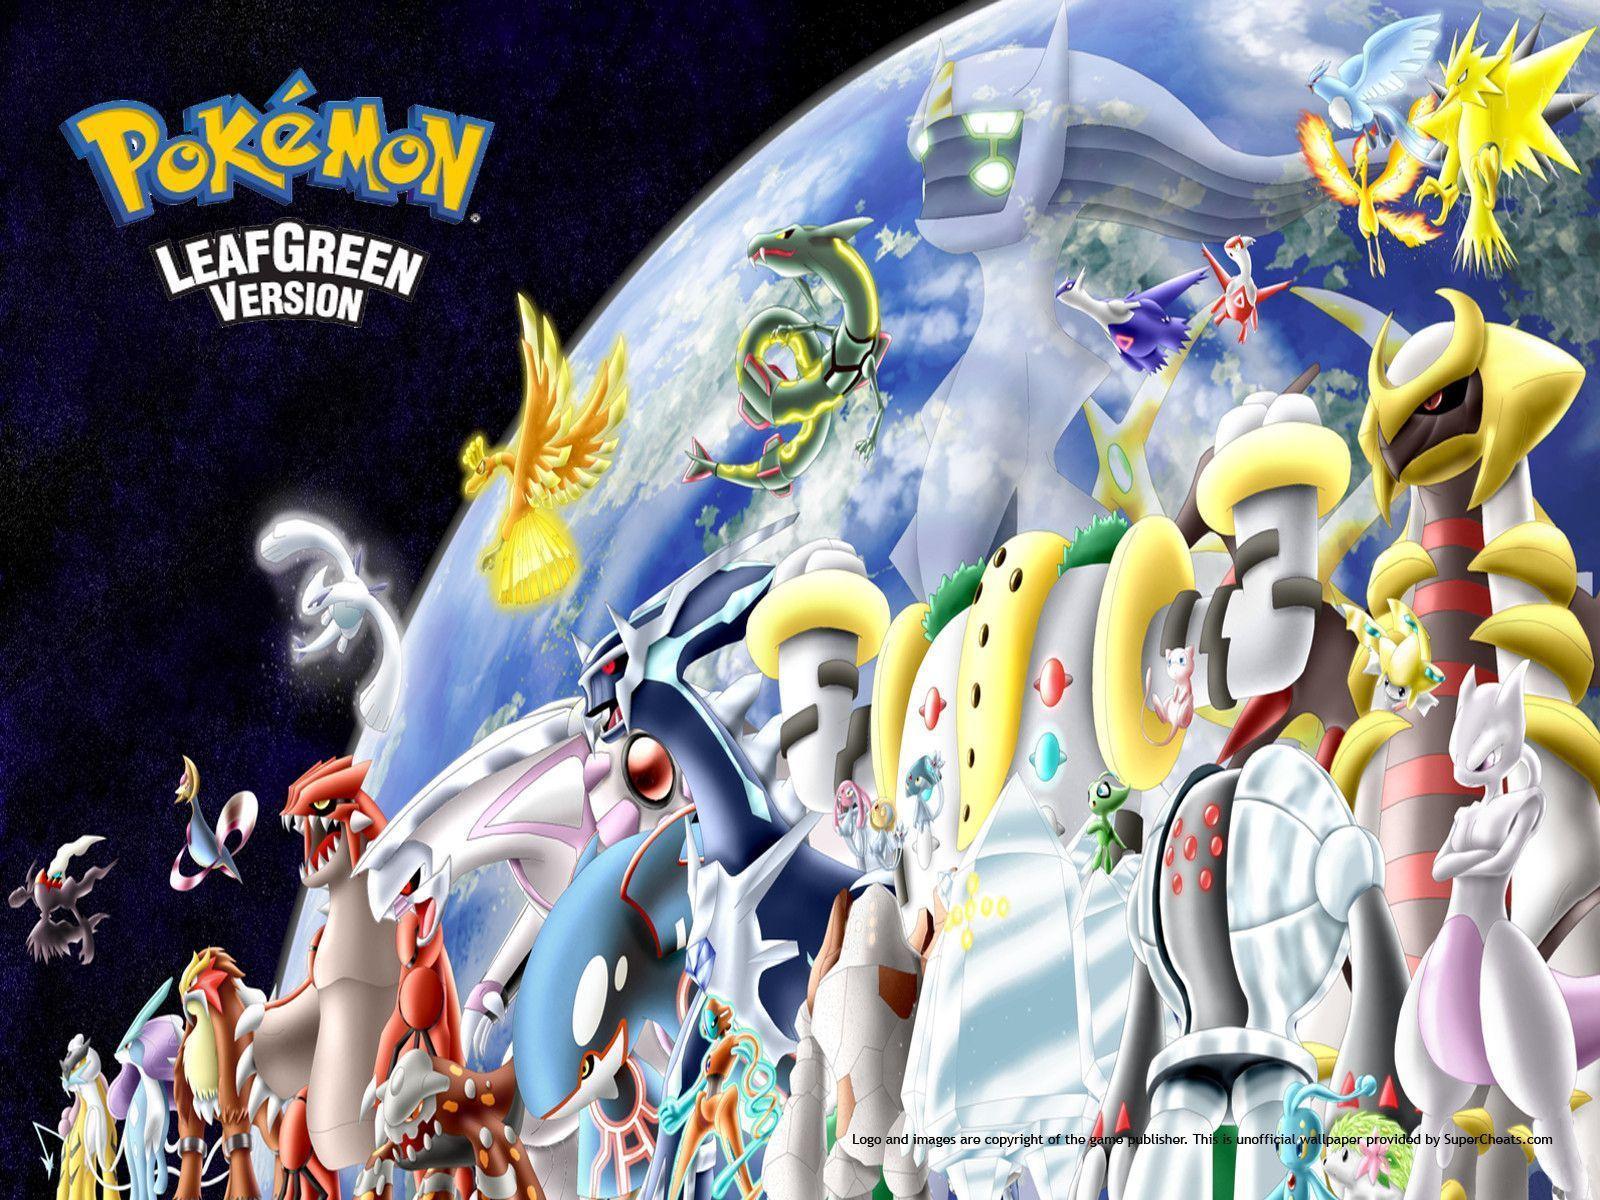 Best Pokemon wallpapers backgrounds Chrome extension